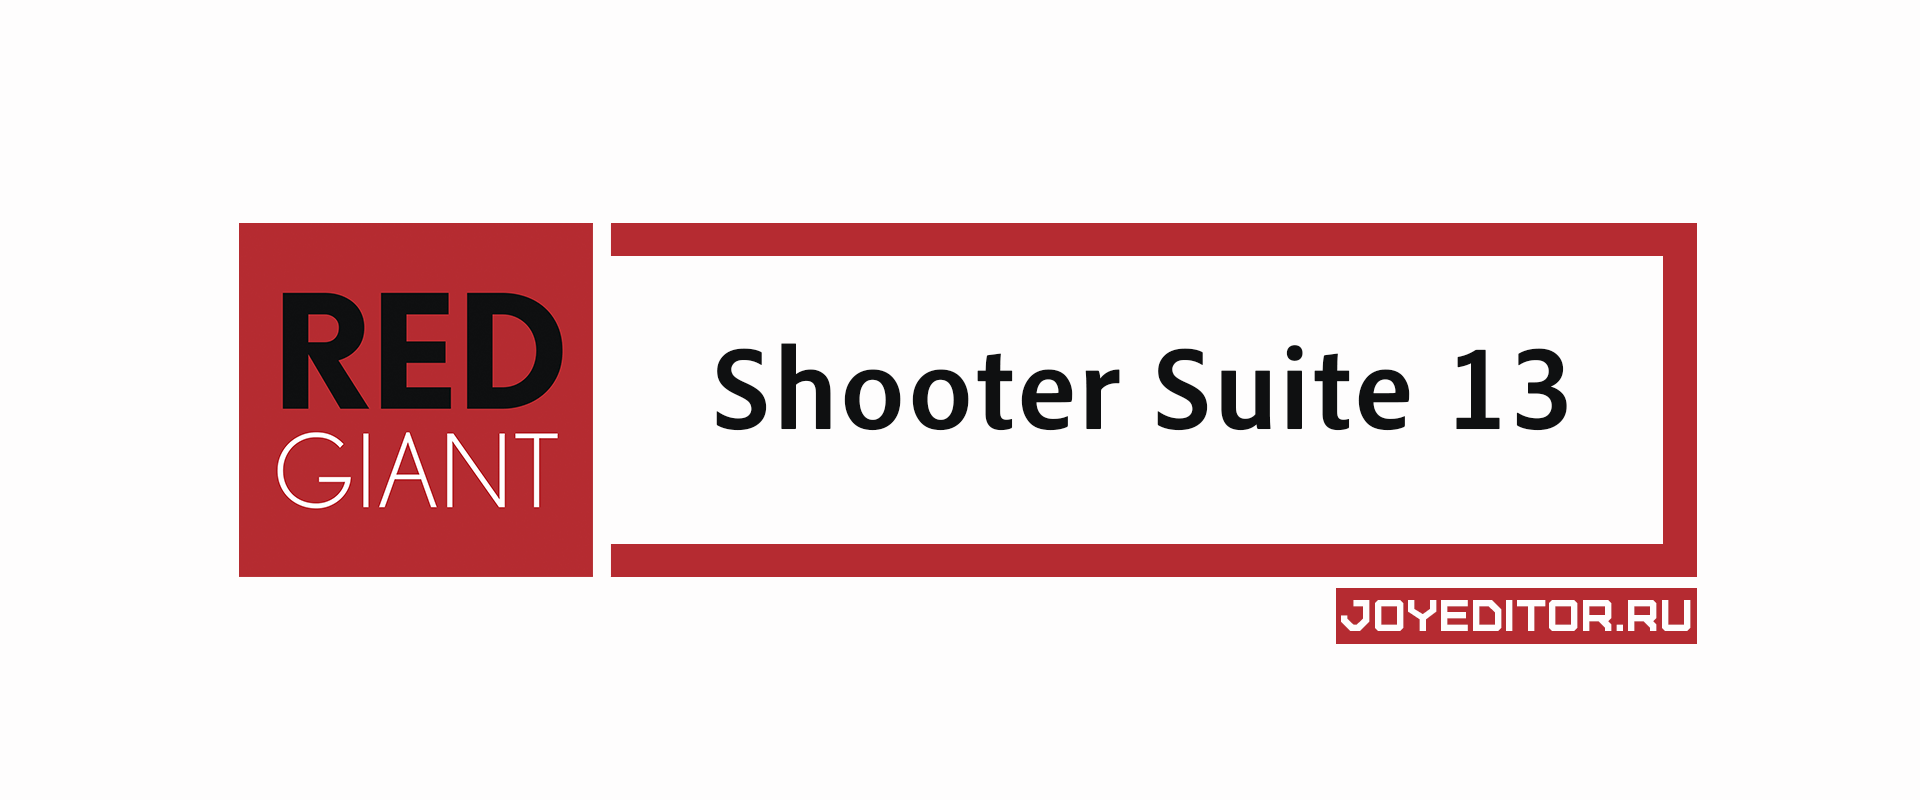 Red Giant - Shooter Suite 13